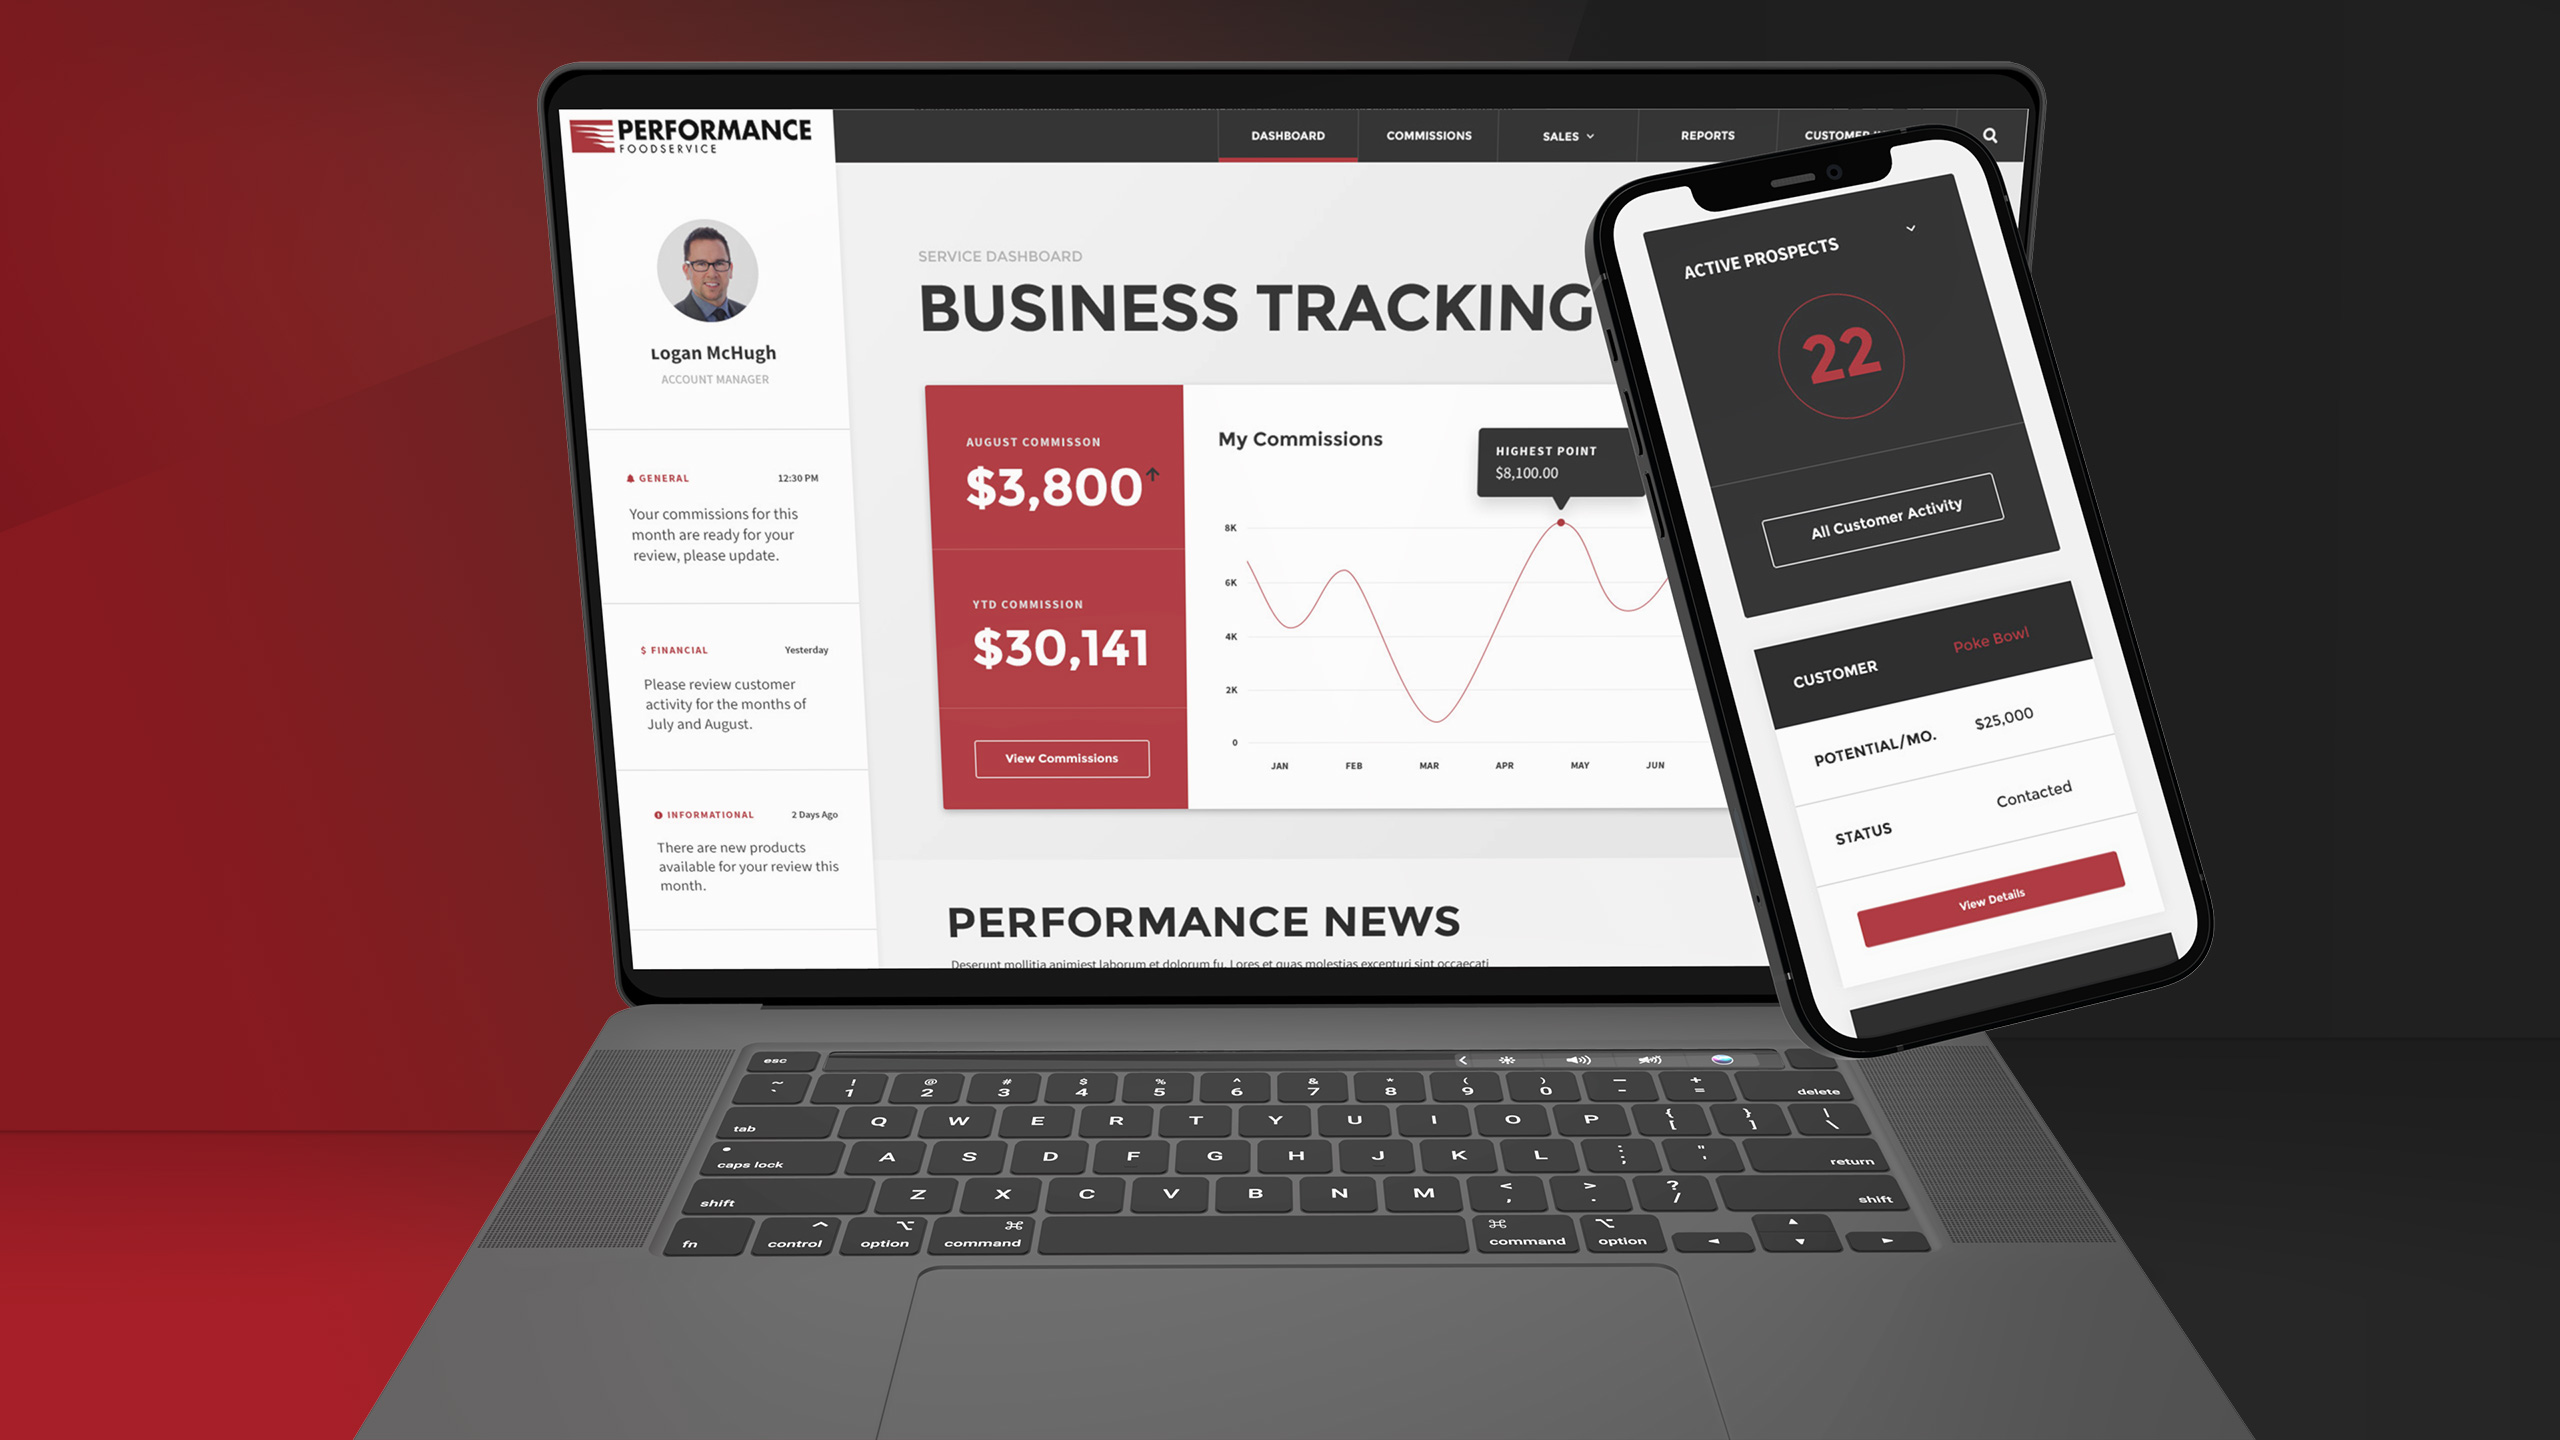 Business tracking dashboard on a laptop and mobile device